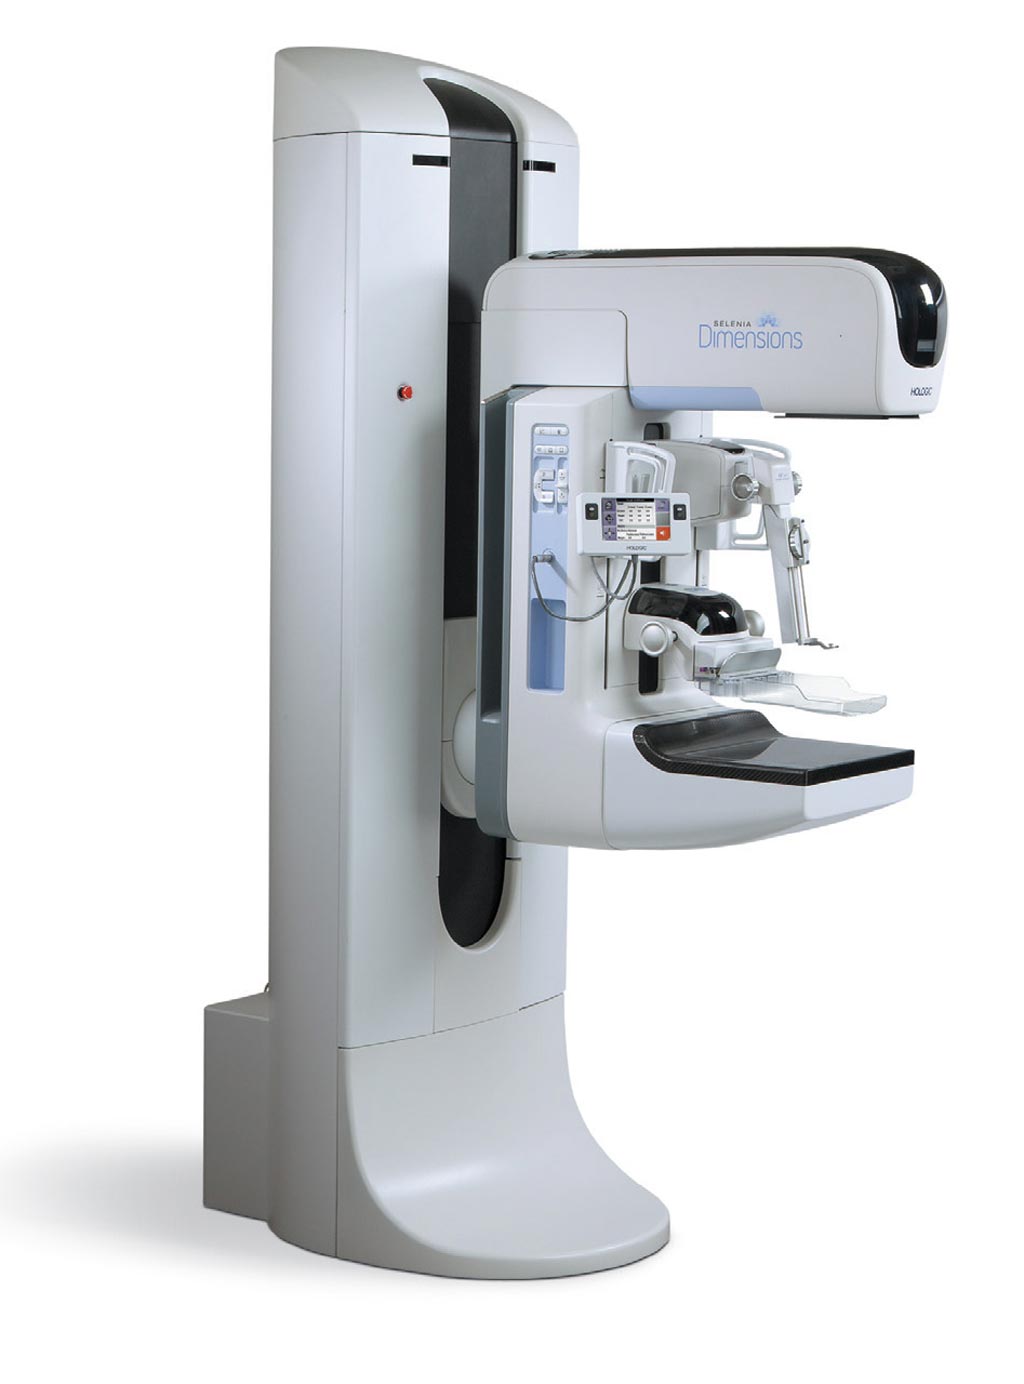 Image: The new 3Dimensions mammography system (Photo courtesy of Hologic).